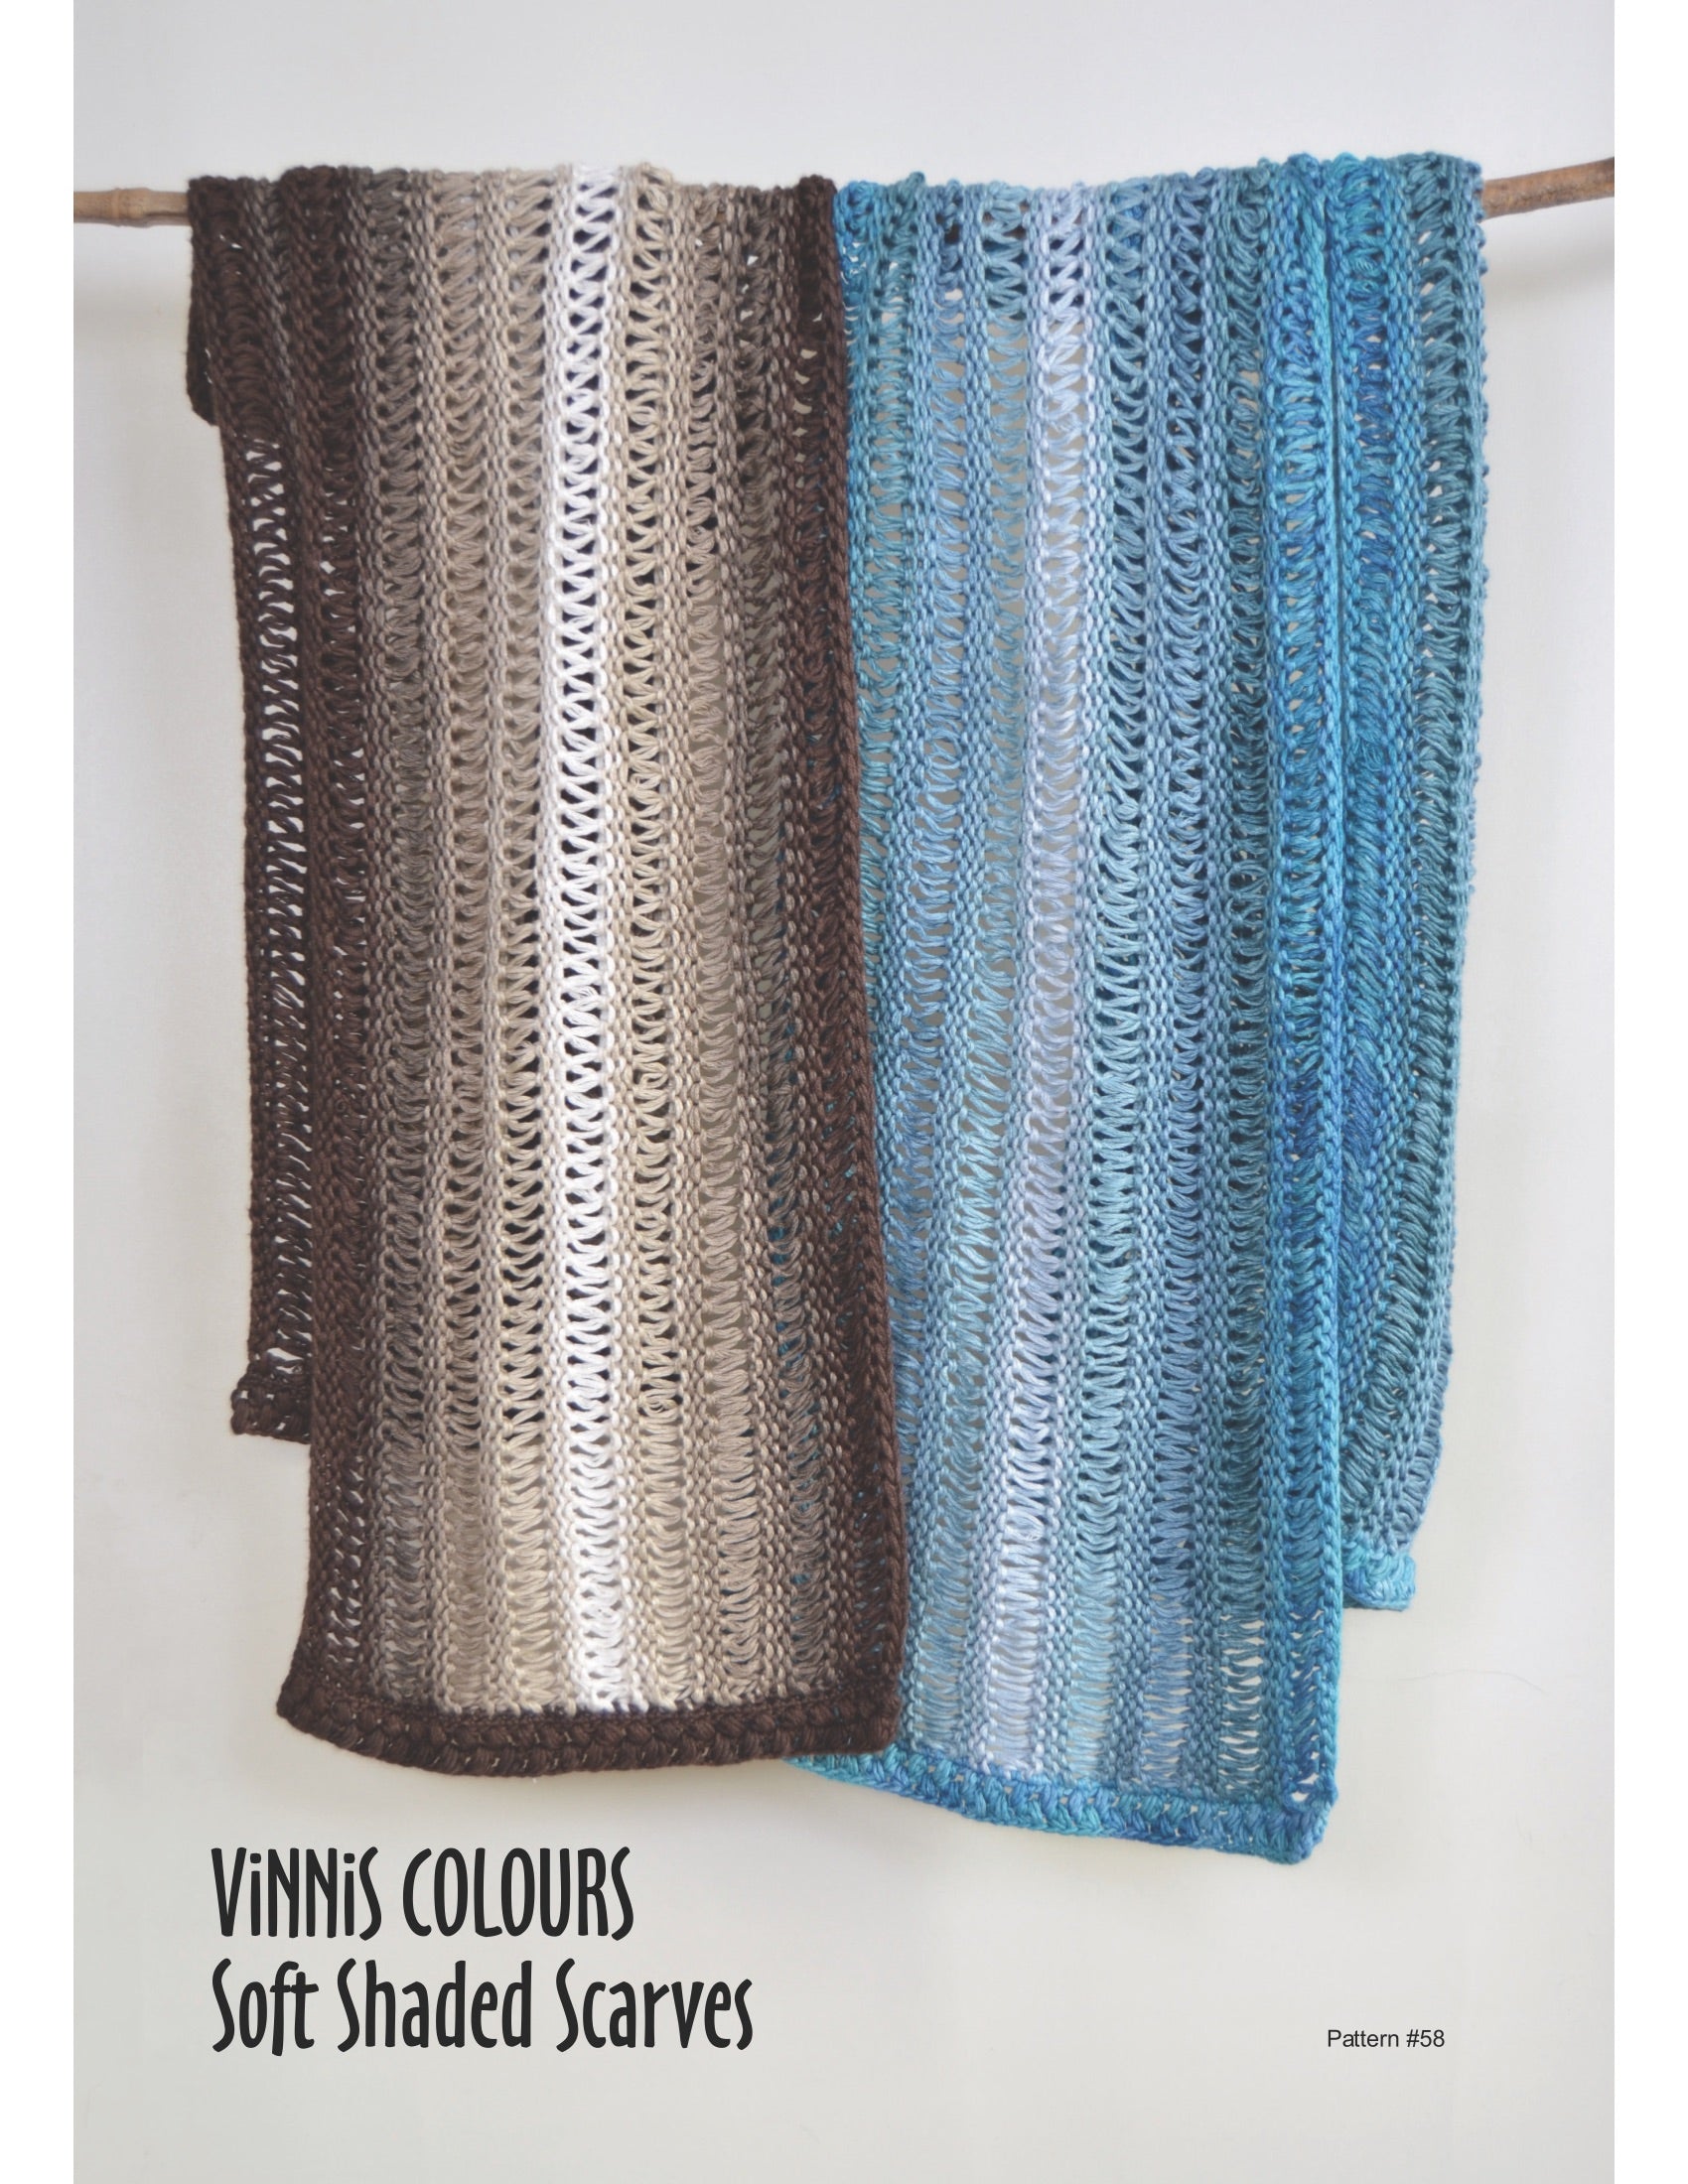 VCDL - P058 - Soft Shaded Scarves